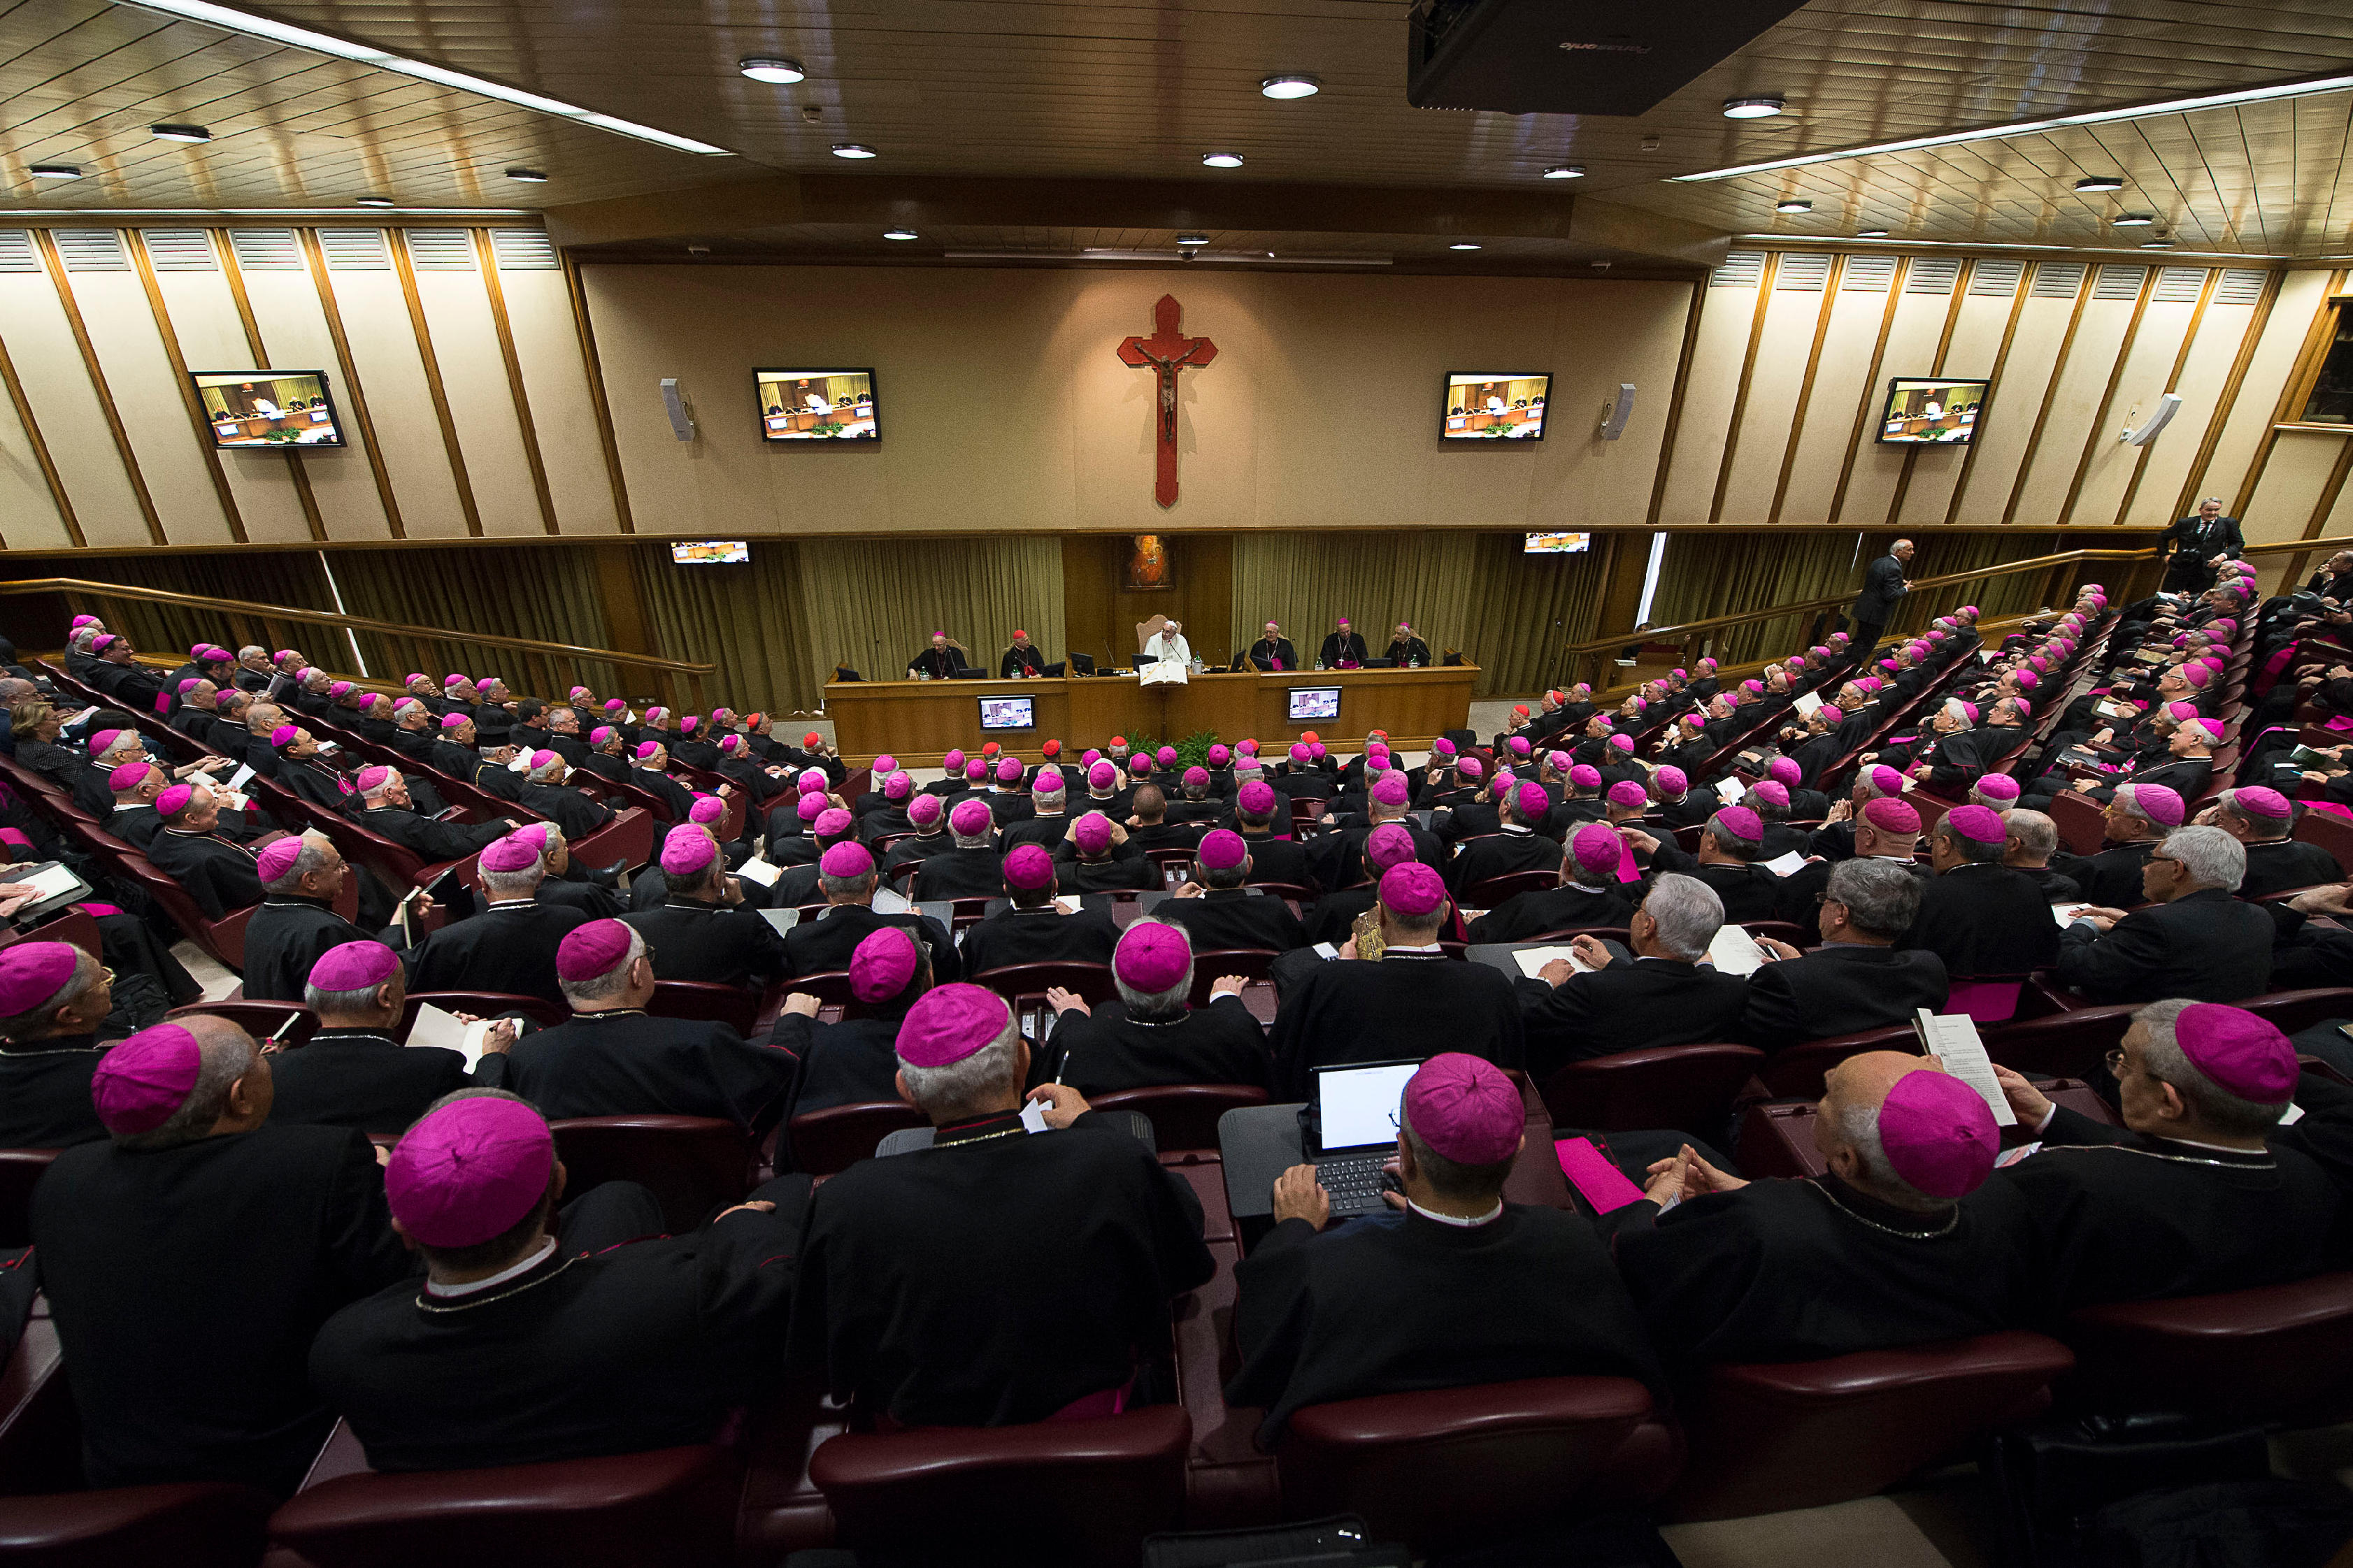 Pope meets the Italian Conference of Bishops (CEI) on Monday